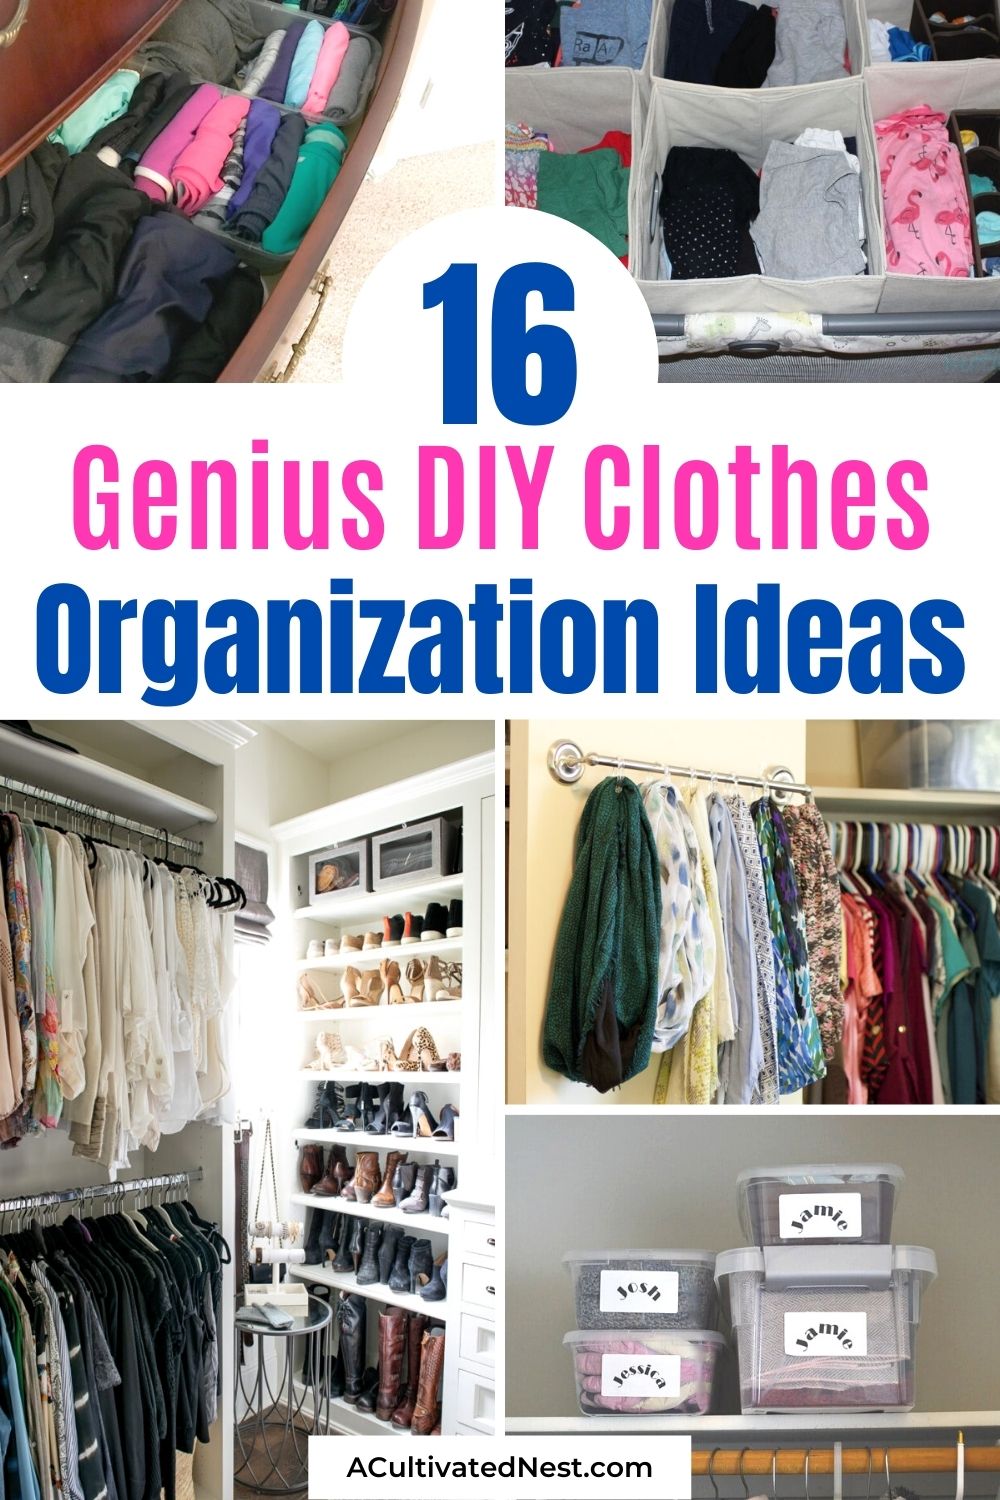 16 Genius DIY Clothes Organizer Ideas- Organize your clothes closet on a budget with these genius DIY clothes organizer ideas! They're so easy to do, and will help you get organized fast! | #clothesOrganization #clothesOrganizing #organizingTips #organizationTips #ACultivatedNest